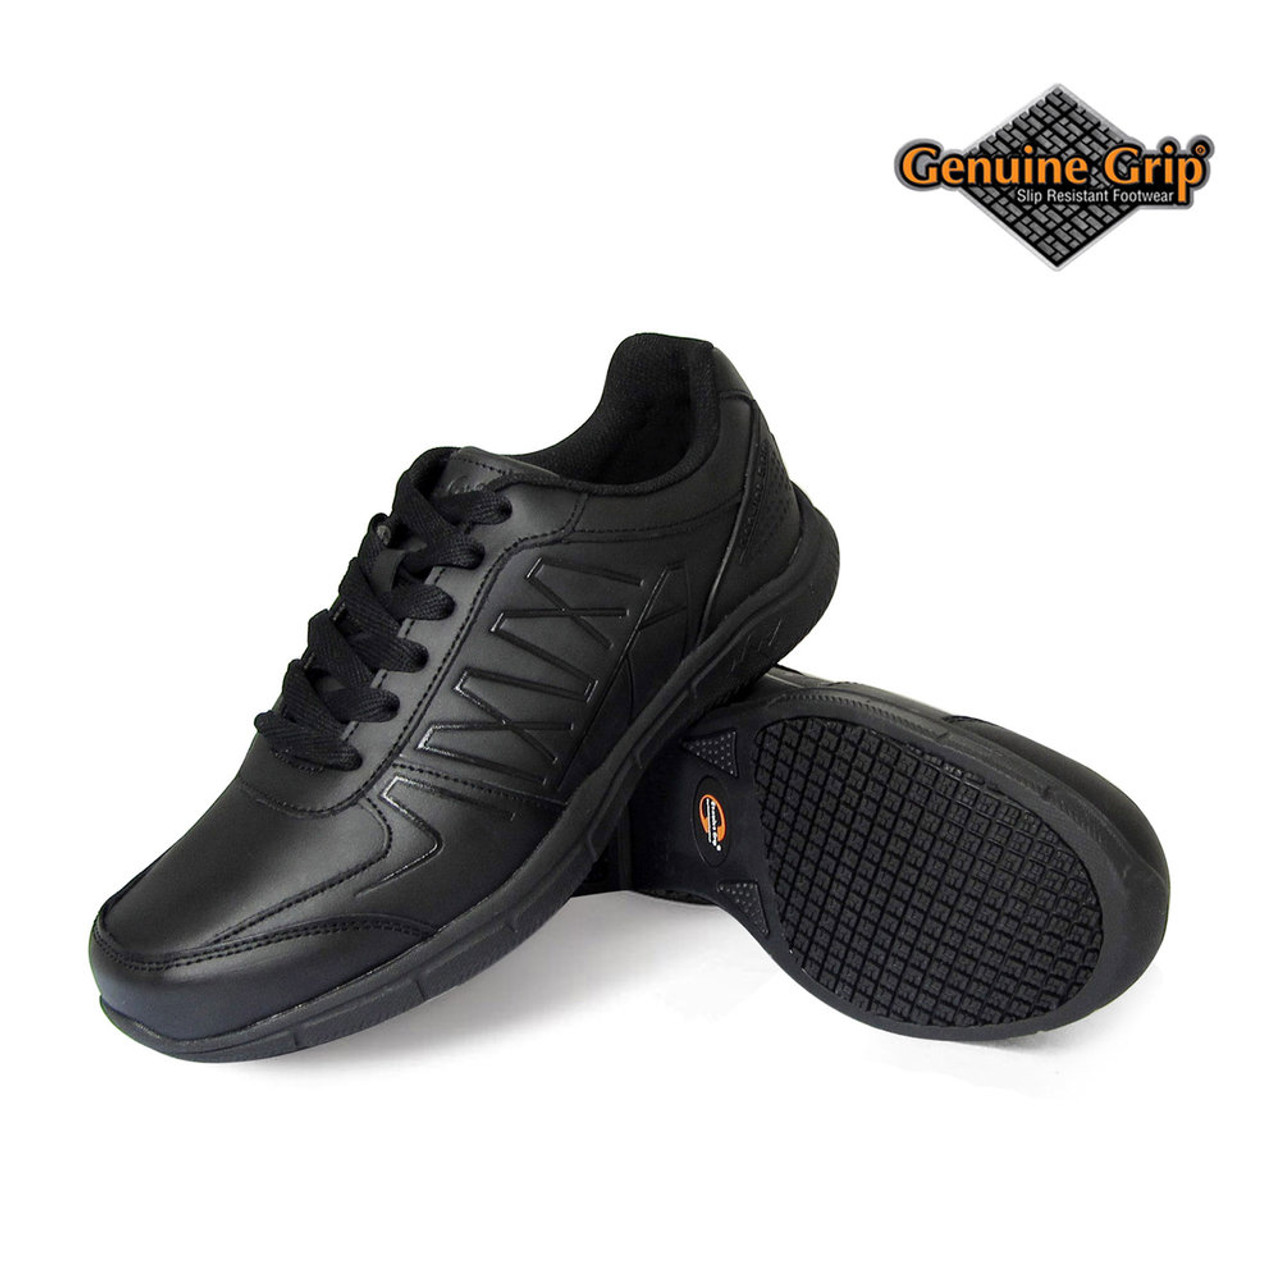 Women's Athletic Work Shoes - ChefsCloset